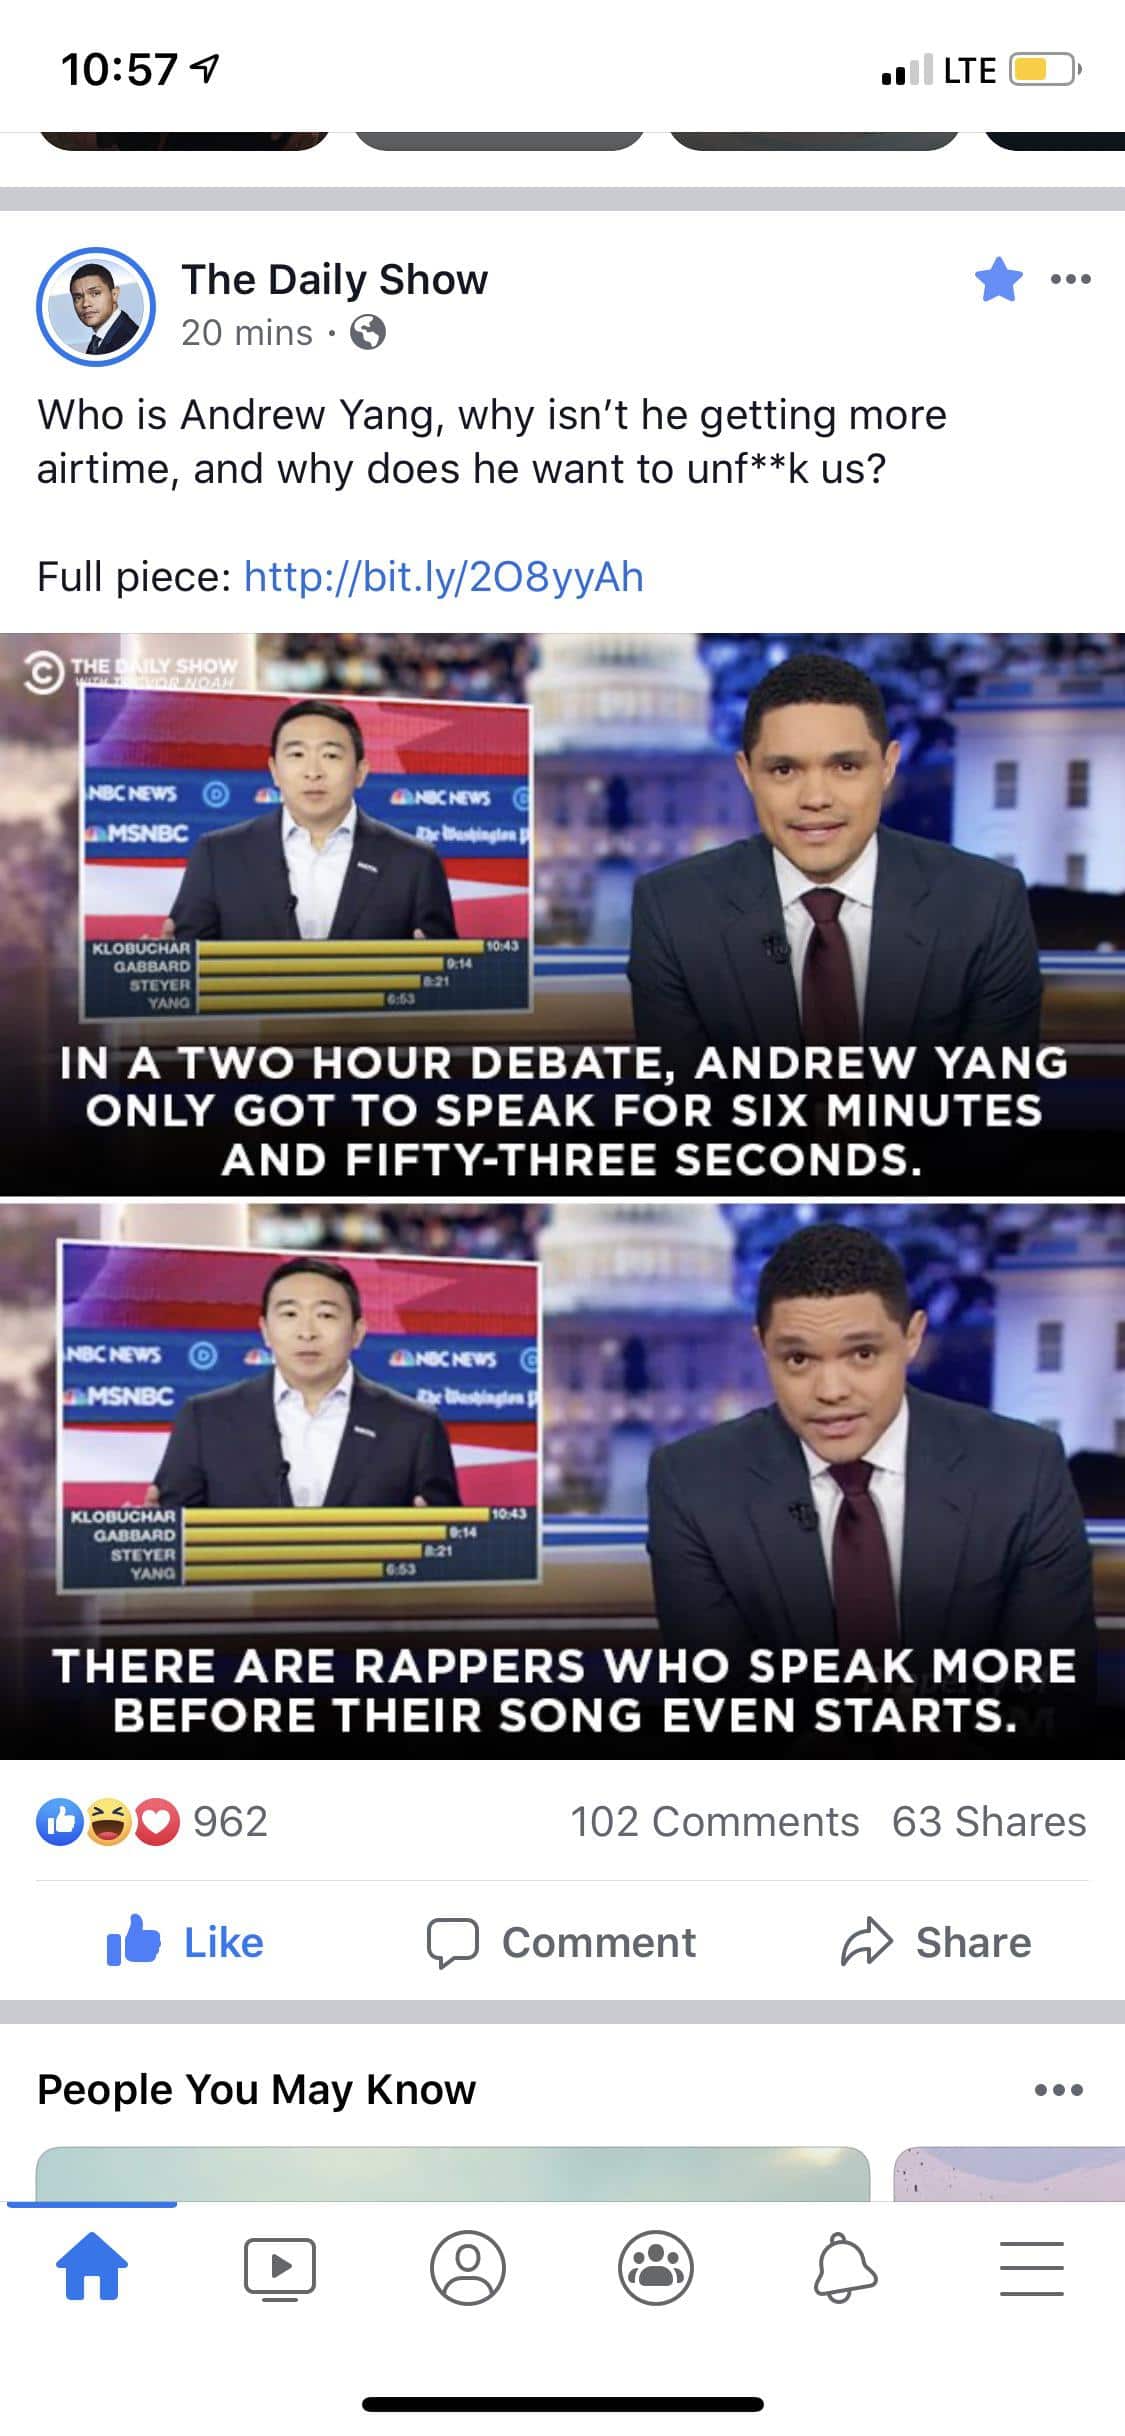 political yang-memes political text: 10:57 q 'LTE The Daily Show 20 mins • S Who is Andrew Yang, why isn't he getting more airtime, and why does he want to unf**k us? Full piece: http://bit.ly/208yyAh @THE Y SHOW STEYER YANO IN A TWO HOUR DEBATE, ANDREW YANG-- ONLY GOT TO SPEAK FOR SIX MINUTES AND FIFTY-THREE SECONDS. YANO THERE ARE RAPPERS WHO SPEAK MORE BEFORE THEIR SONG EVEN STARTS. 060 962 'b Like 102 Comments 63 Shares C) Comment Share People You May Know 